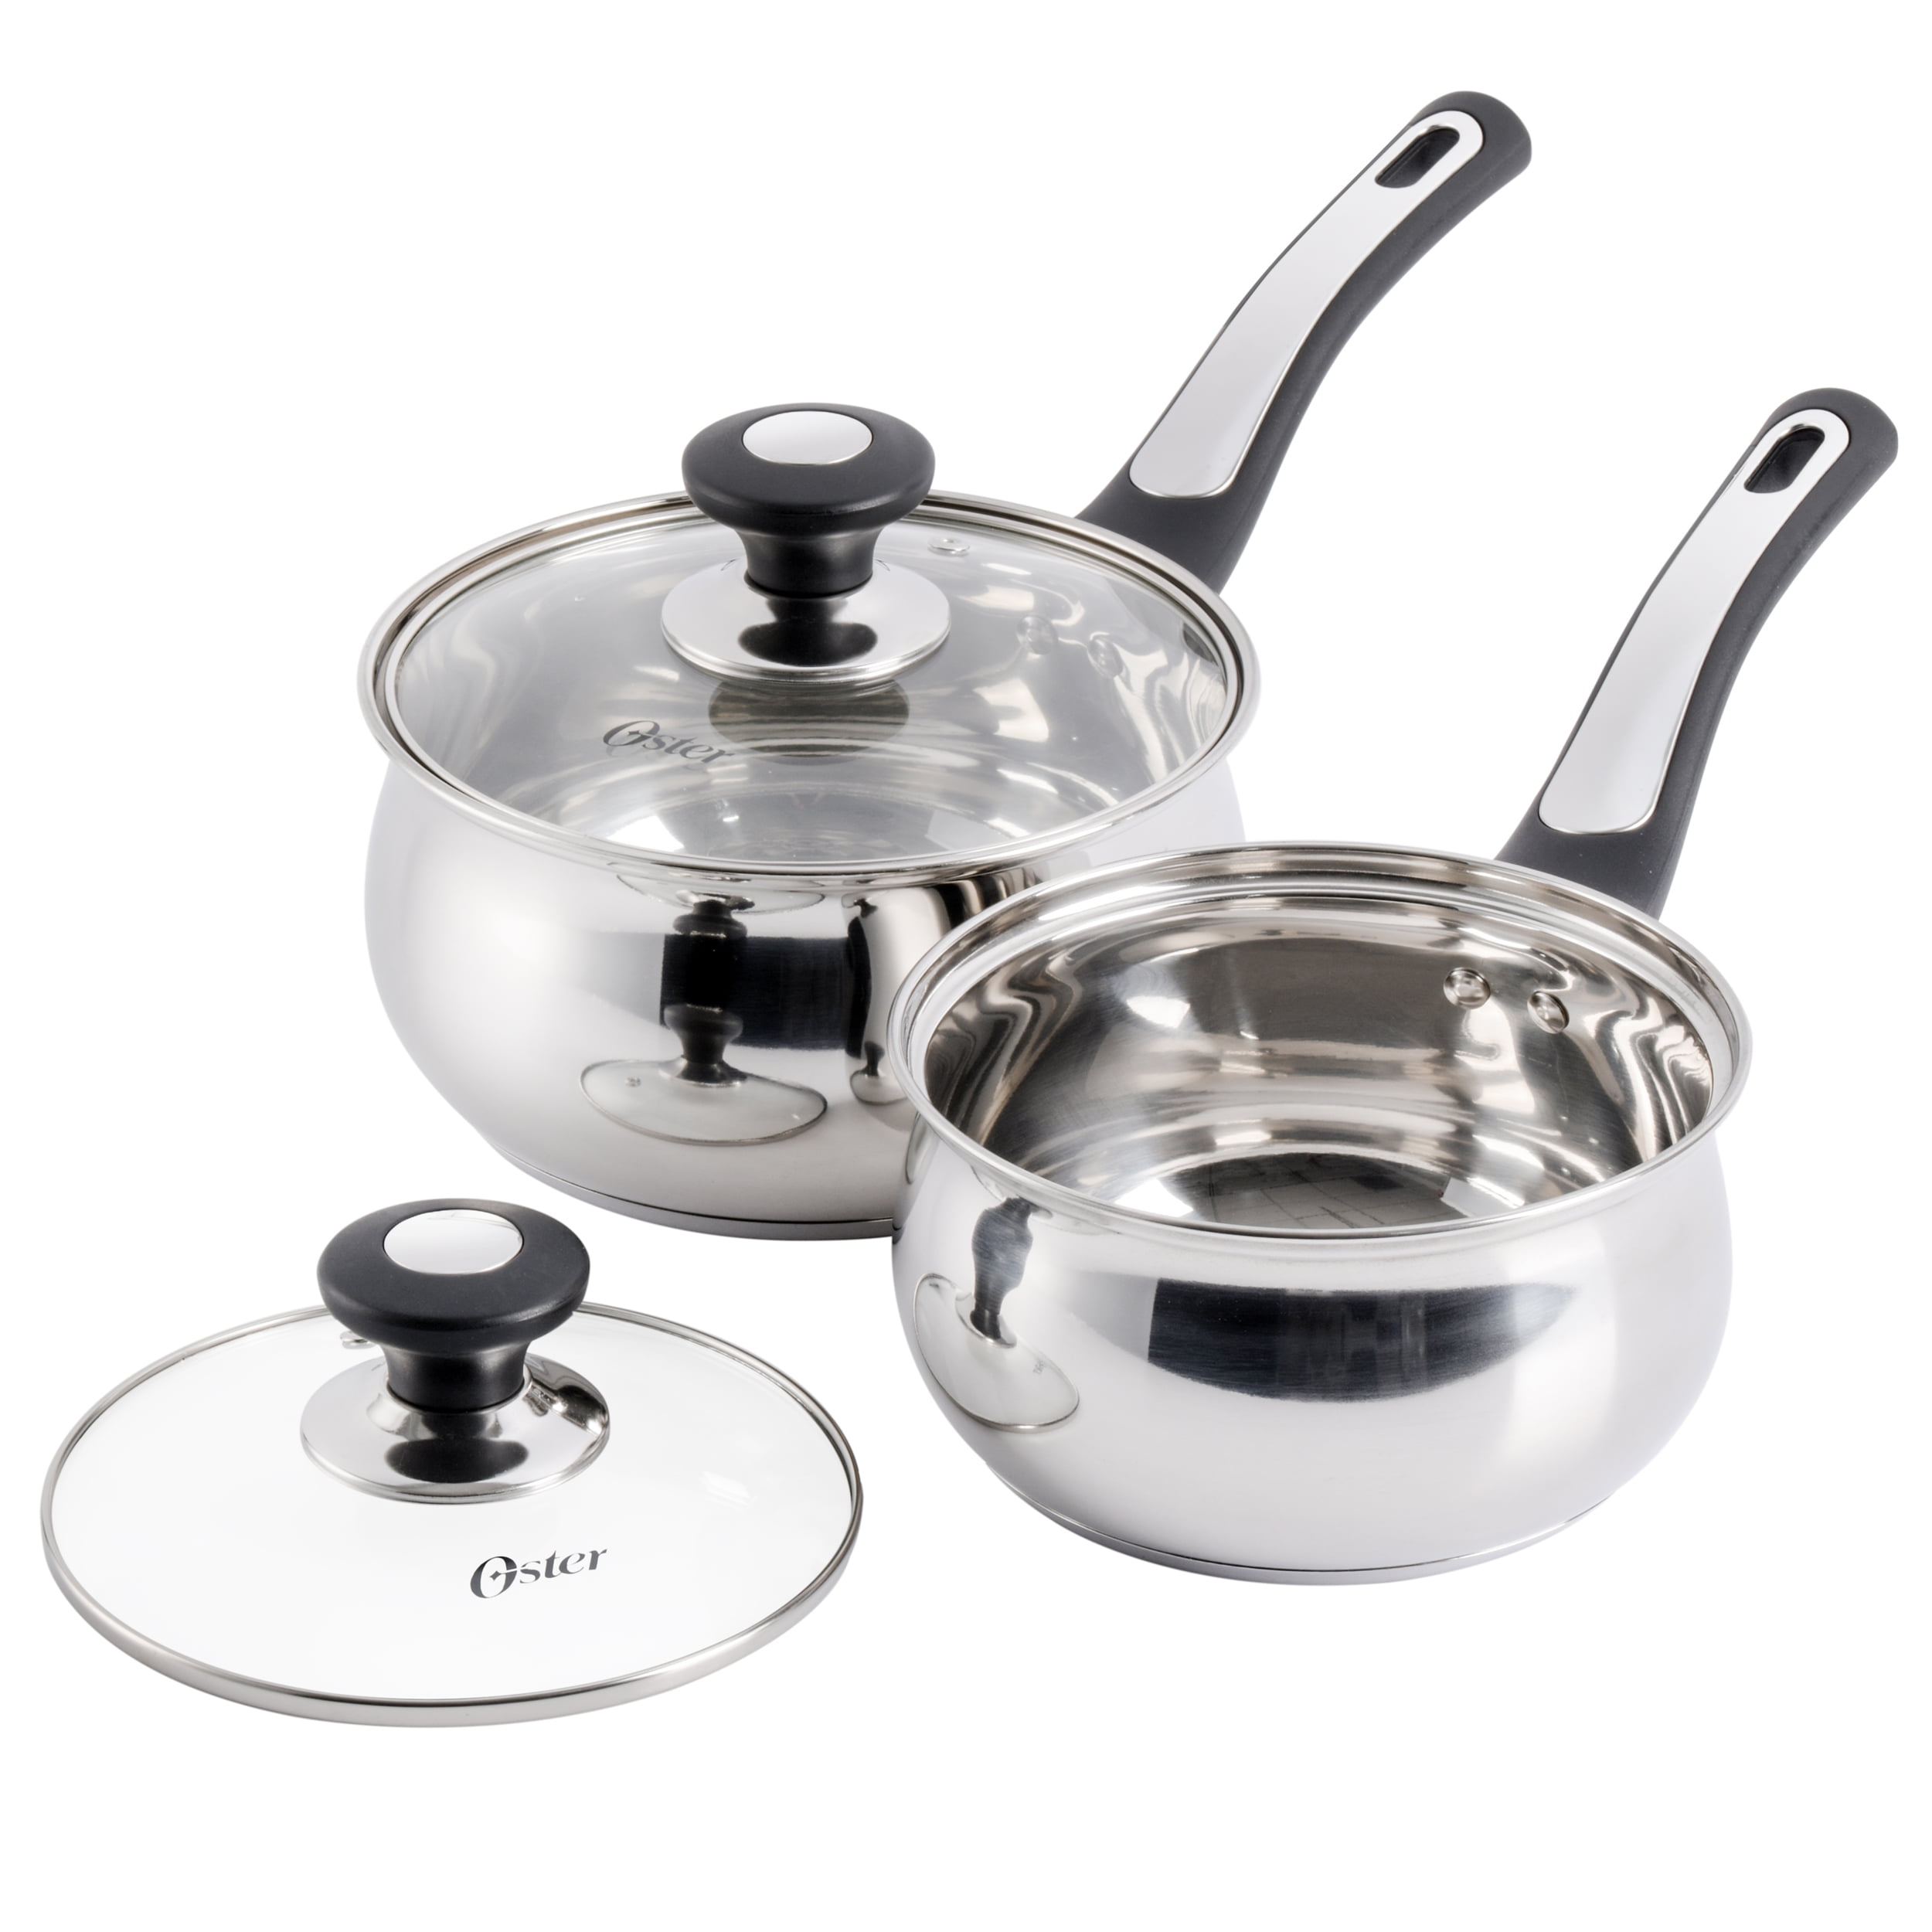 Oster Cuisine Saunders 9 Piece Cookware Set in Silver Mirror